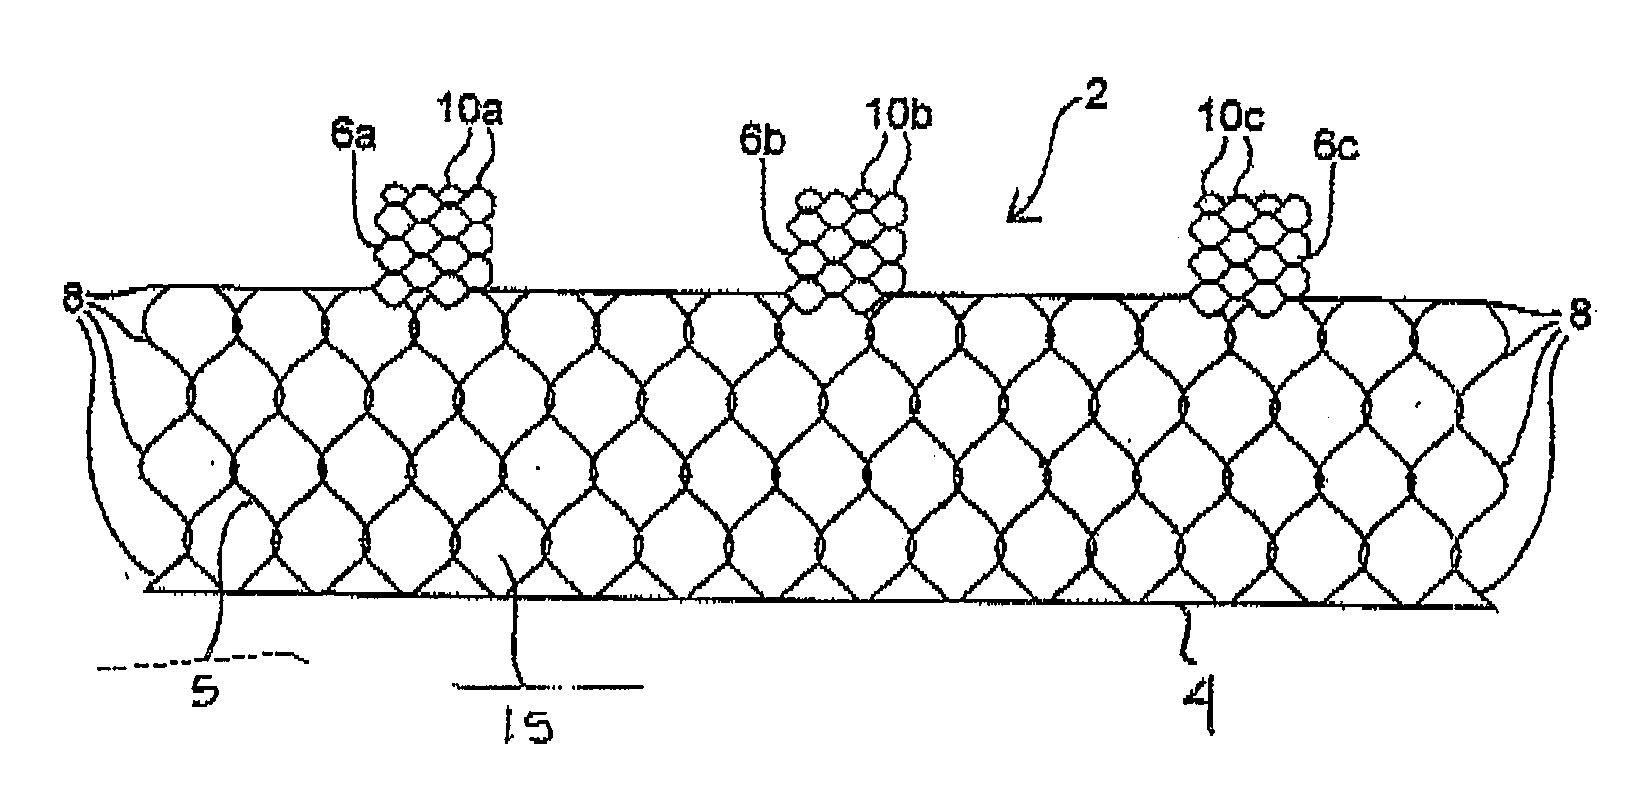 Vascular implants and methods of fabricating the same